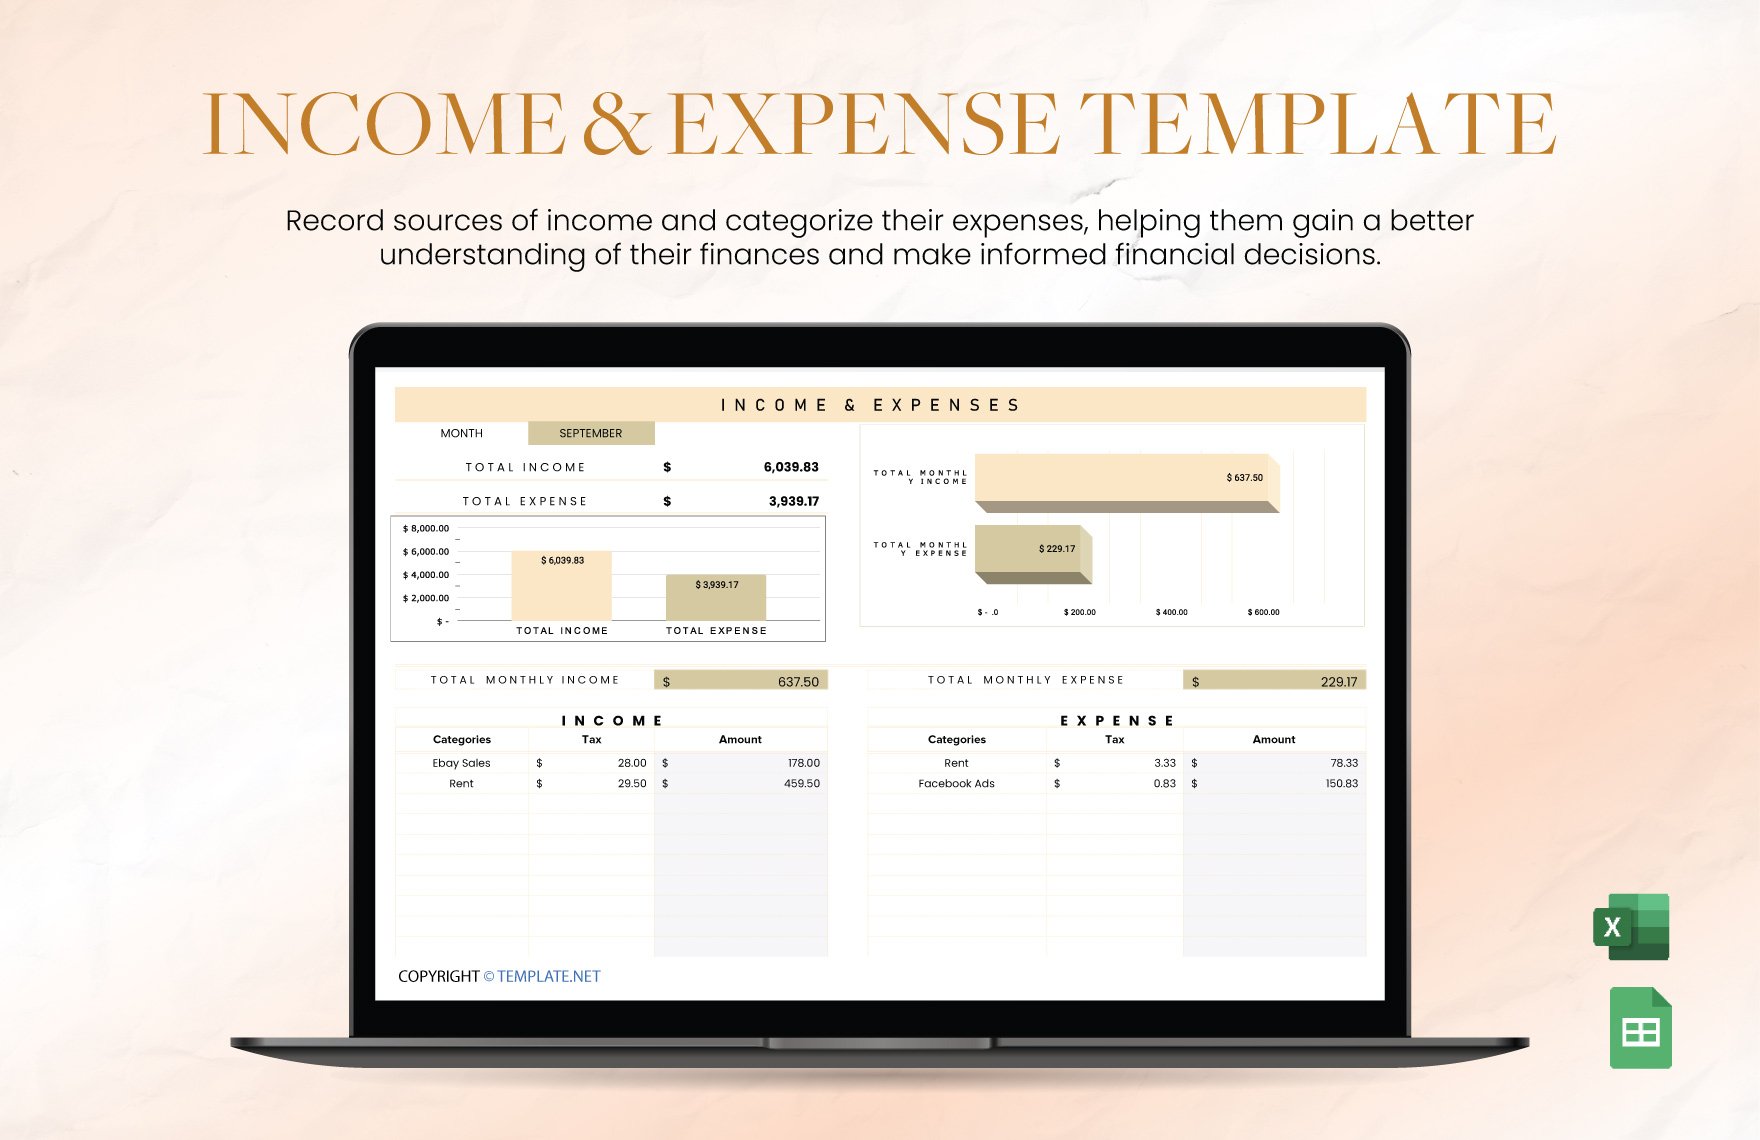 Income & Expense Template for Photographers